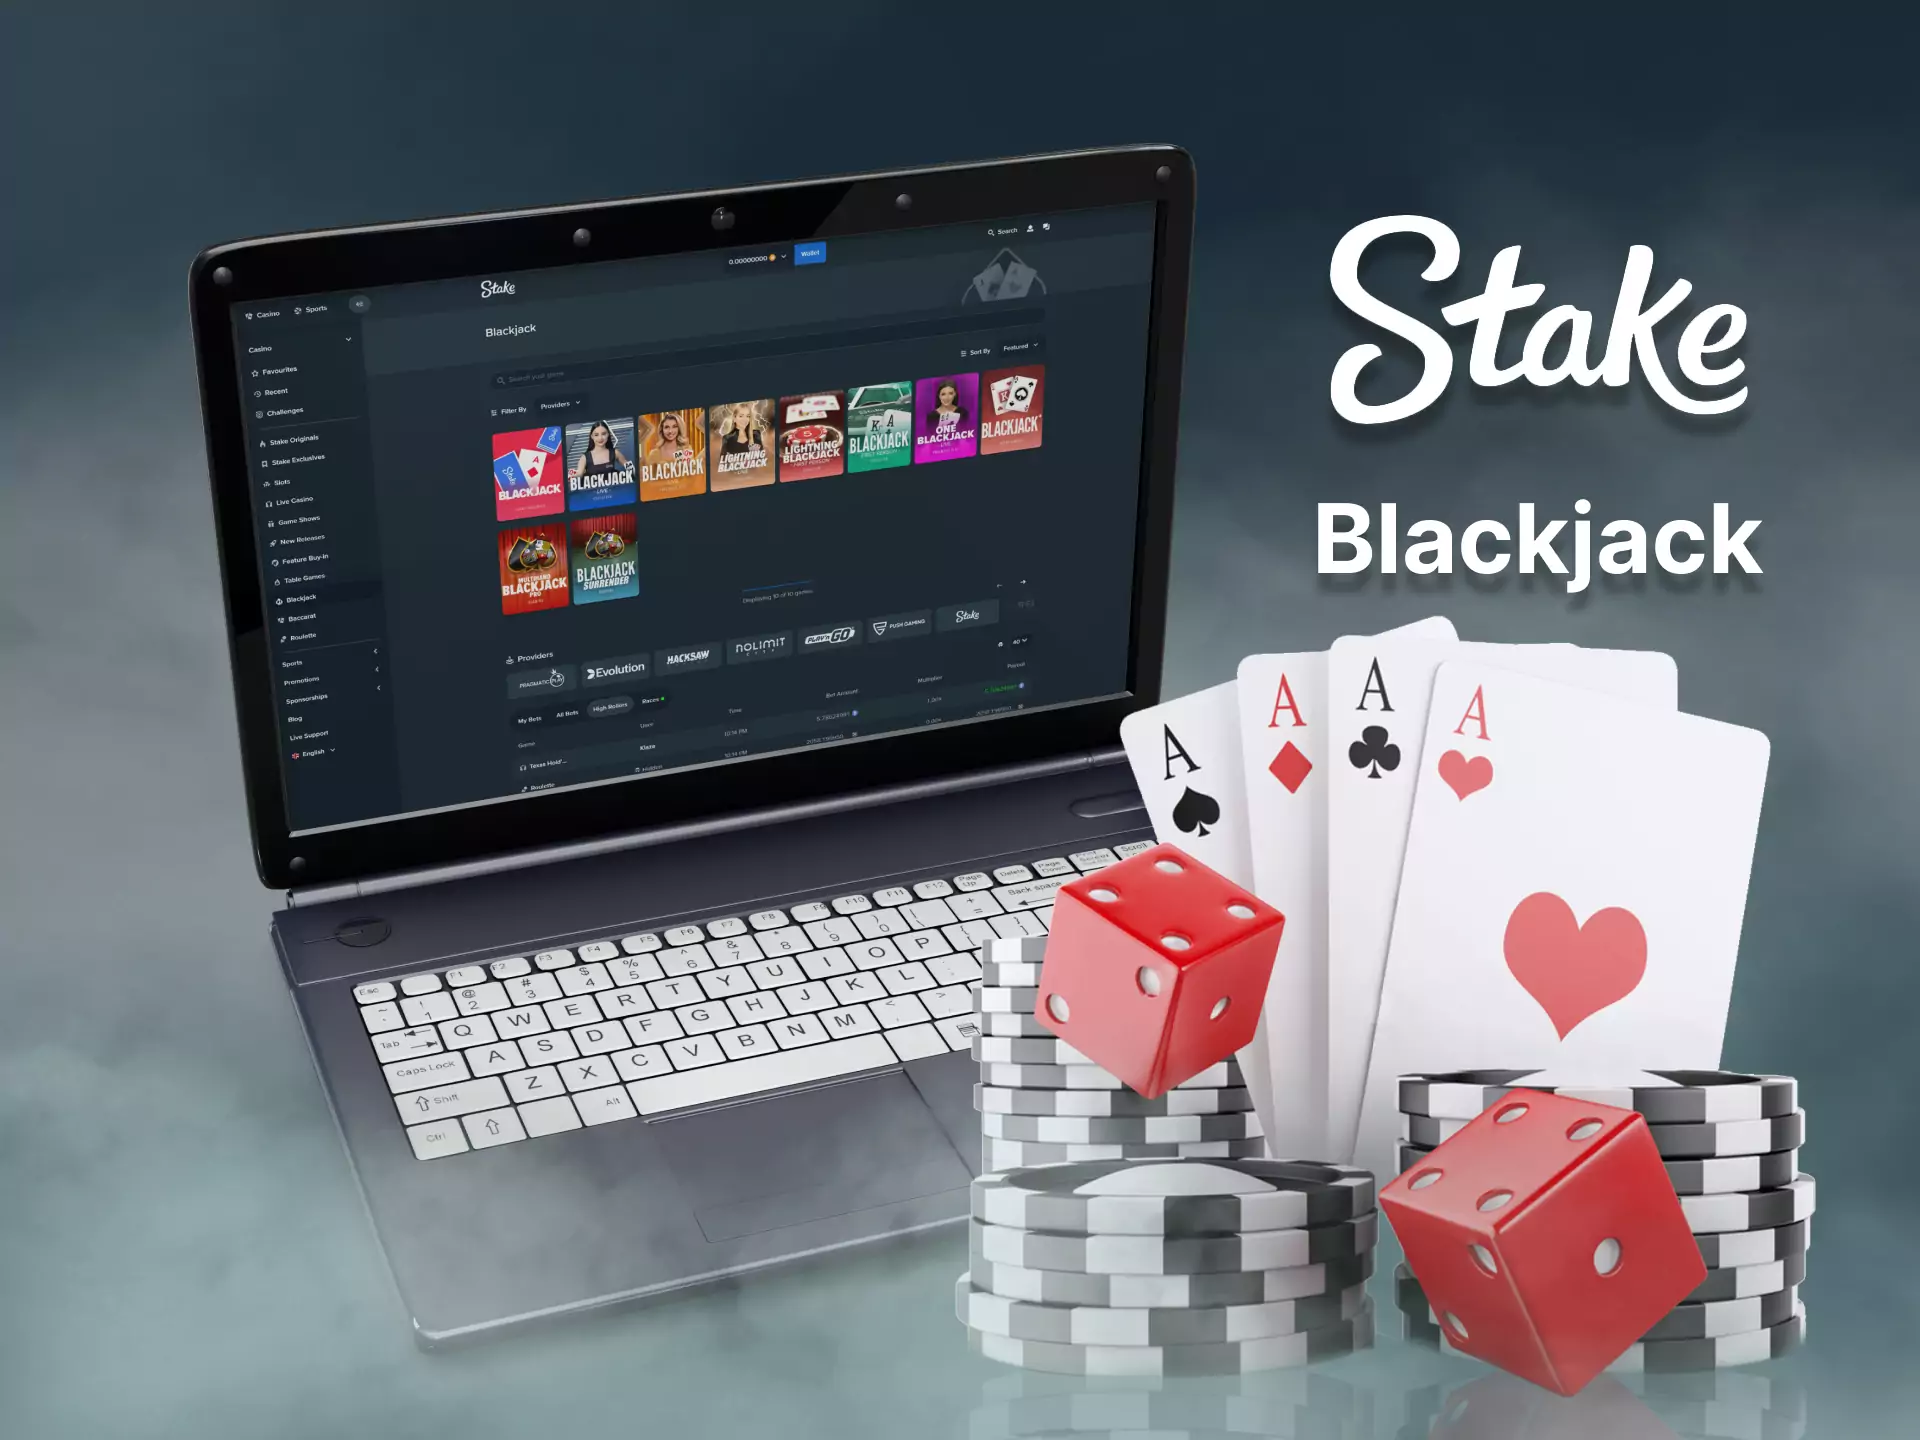 In the Stake online casino, users like to play blackjack.